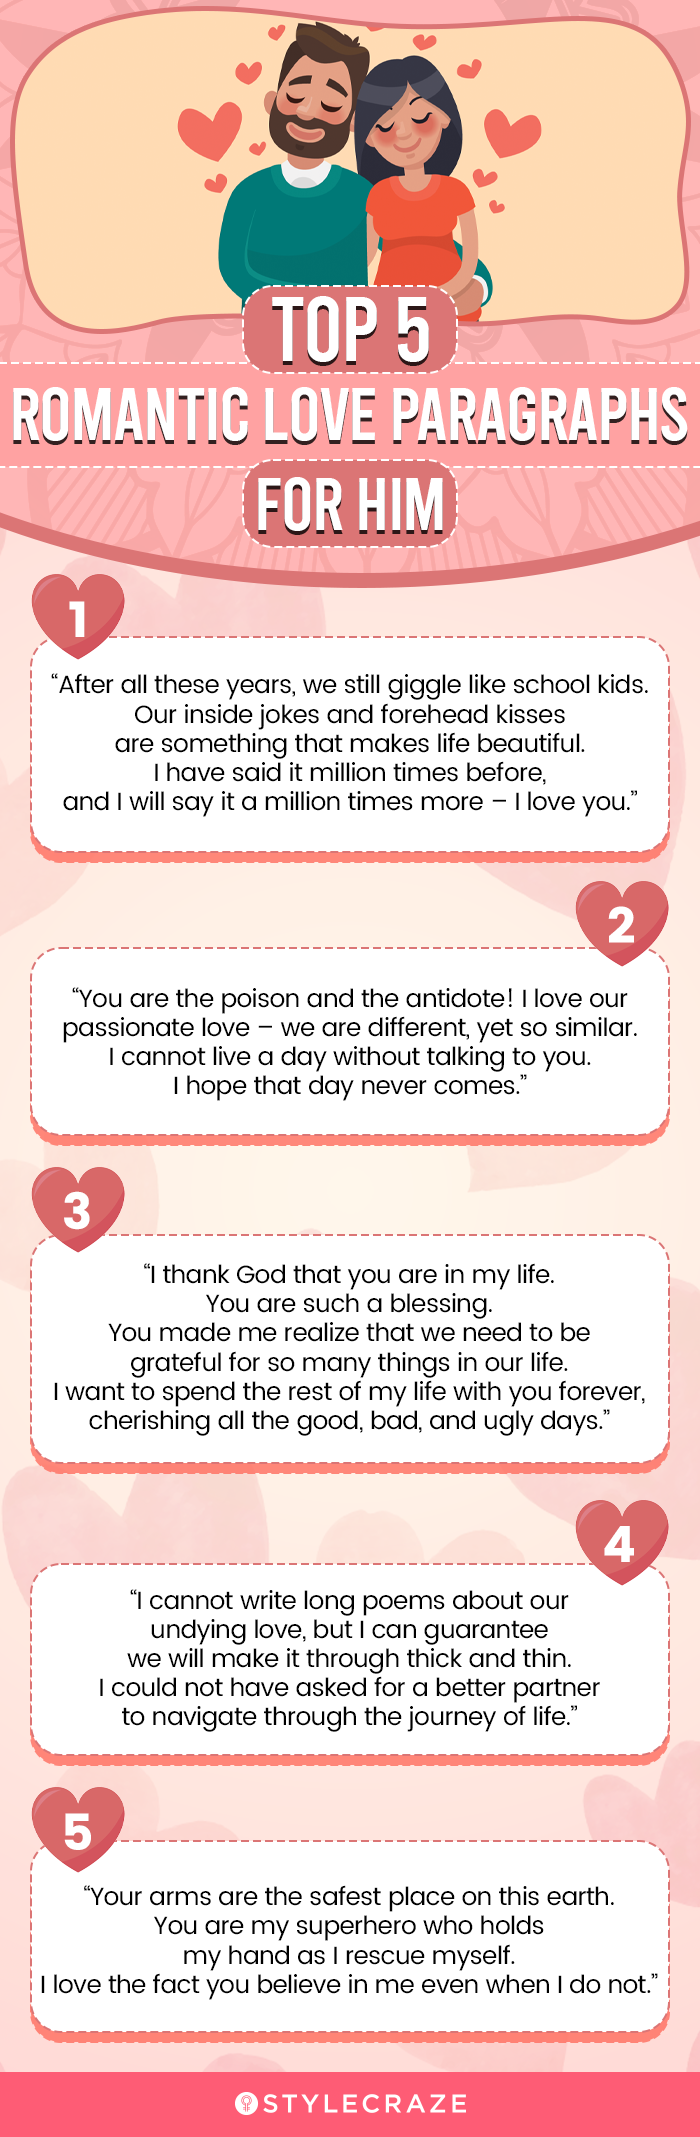 top 5 romantic love paragraphs for him (infographic)